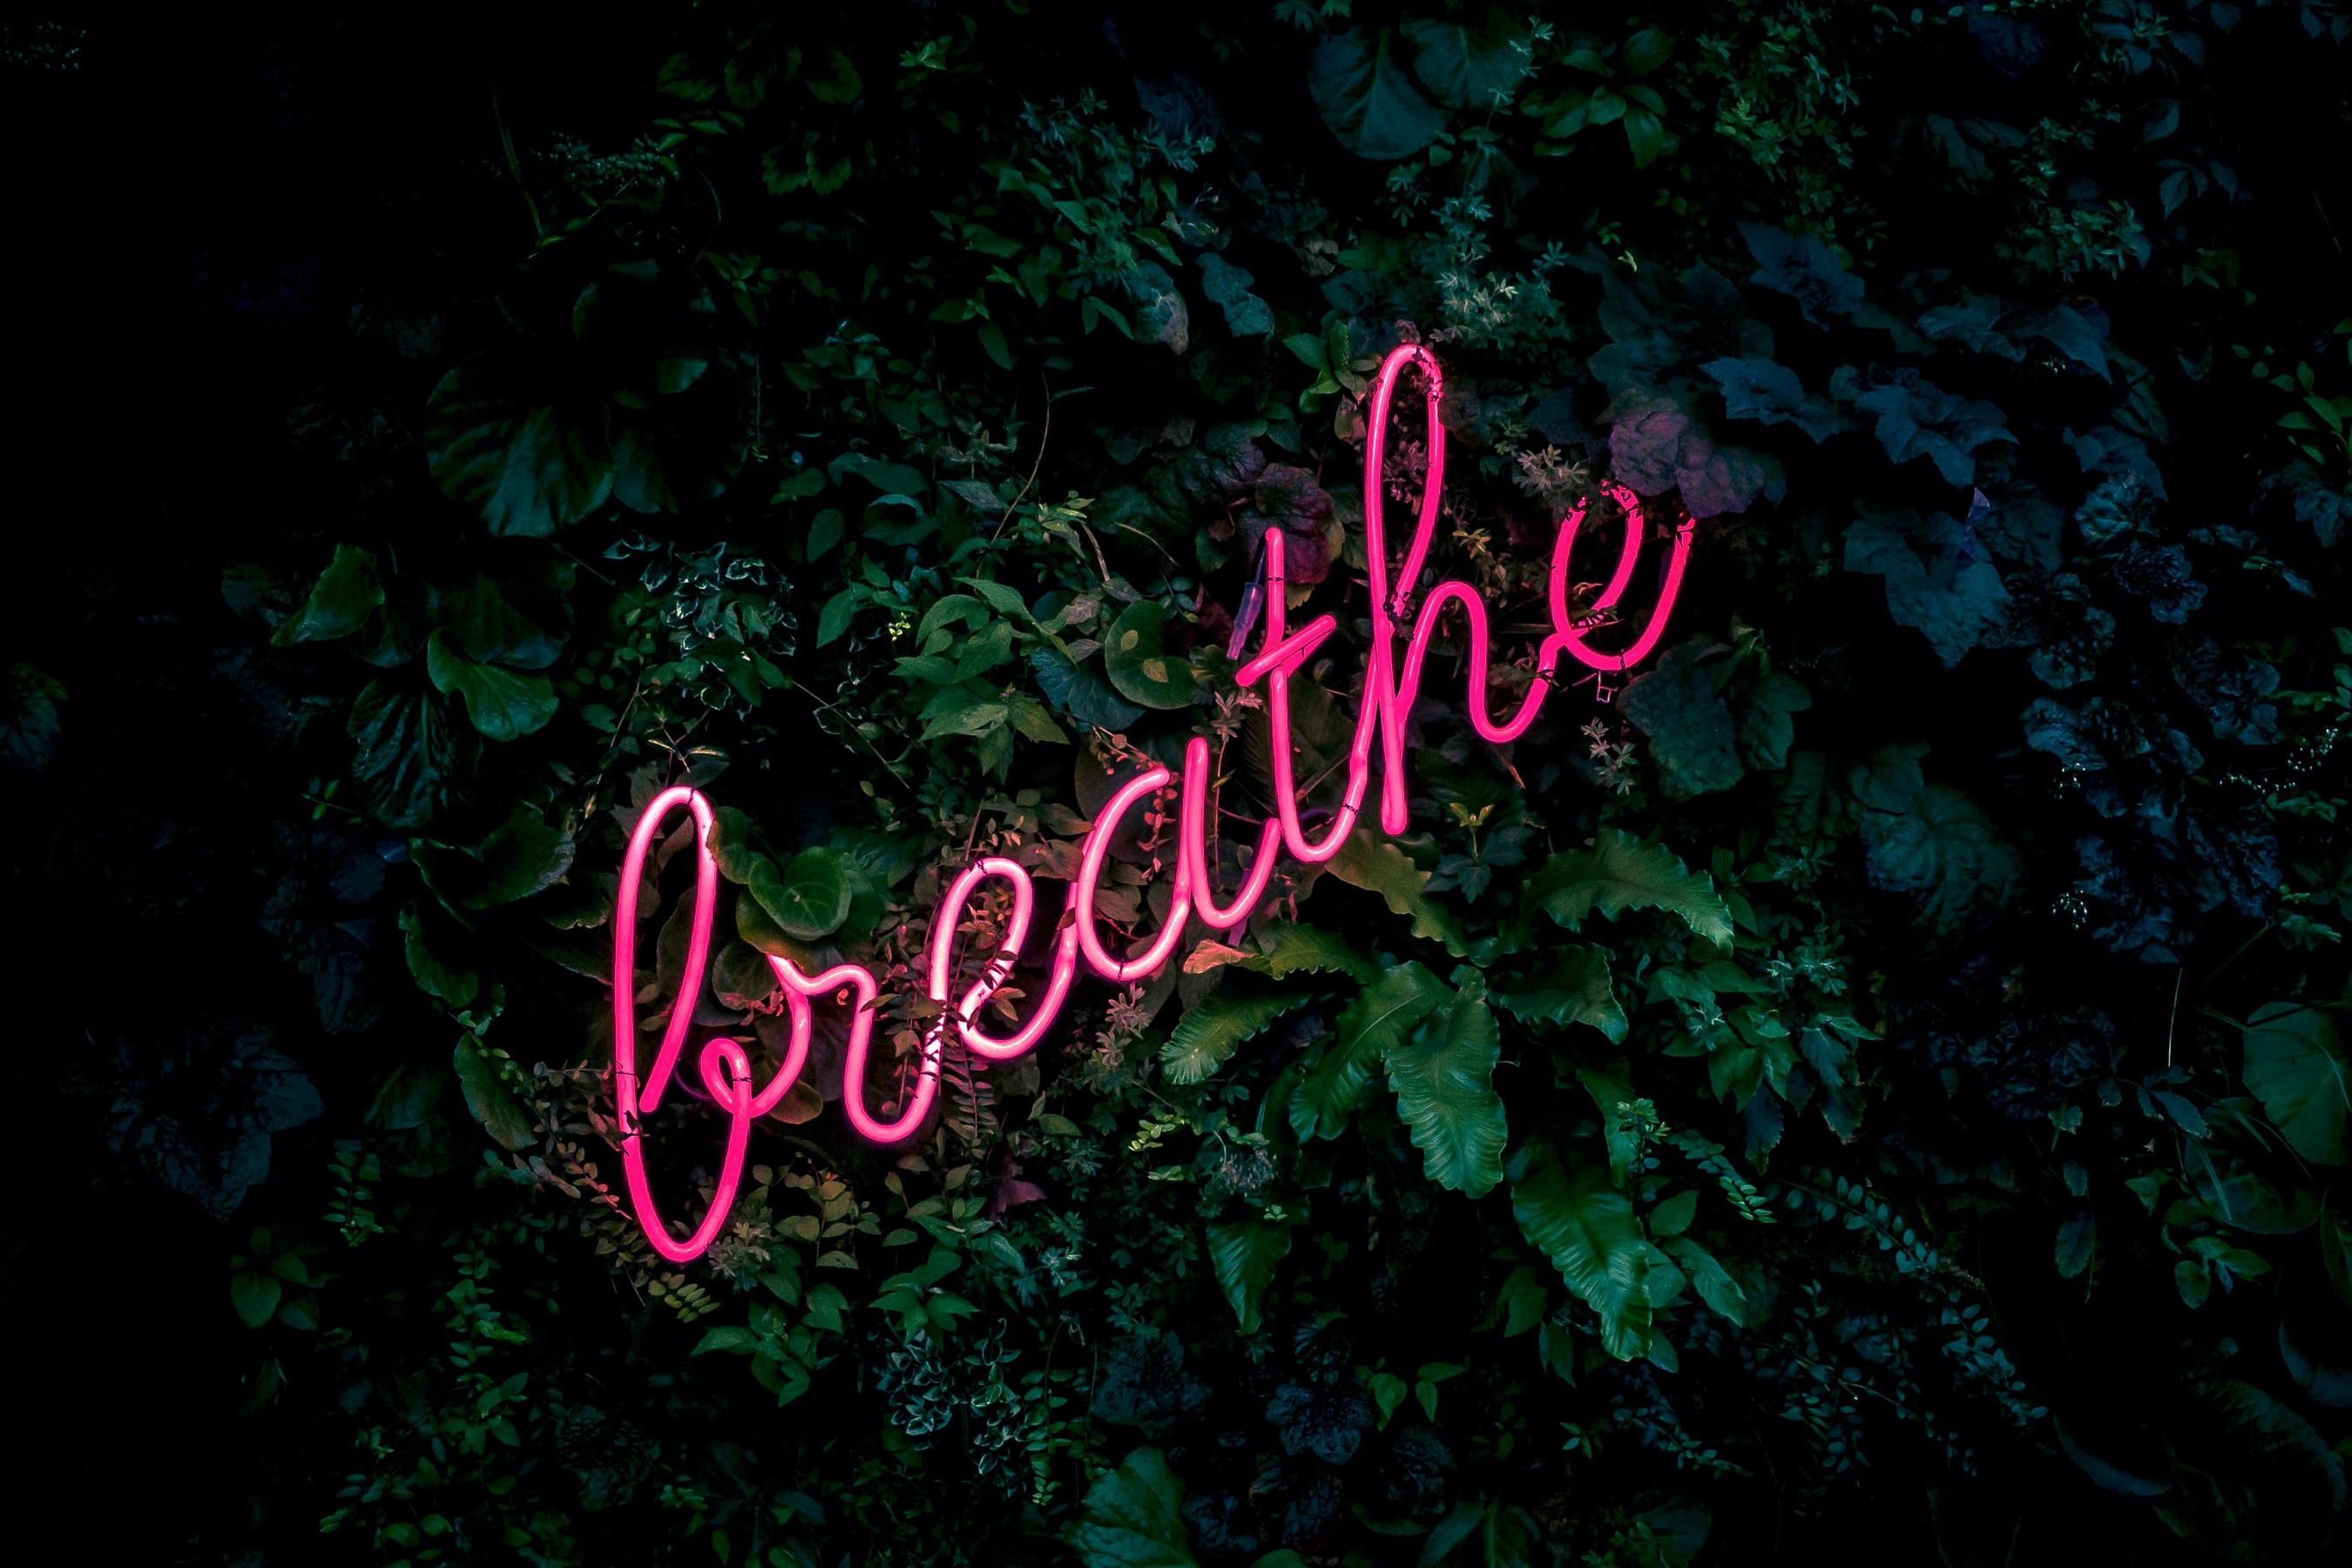 neon light nestled in shrubby show the word "breathe" a good reminder when utilizing massage